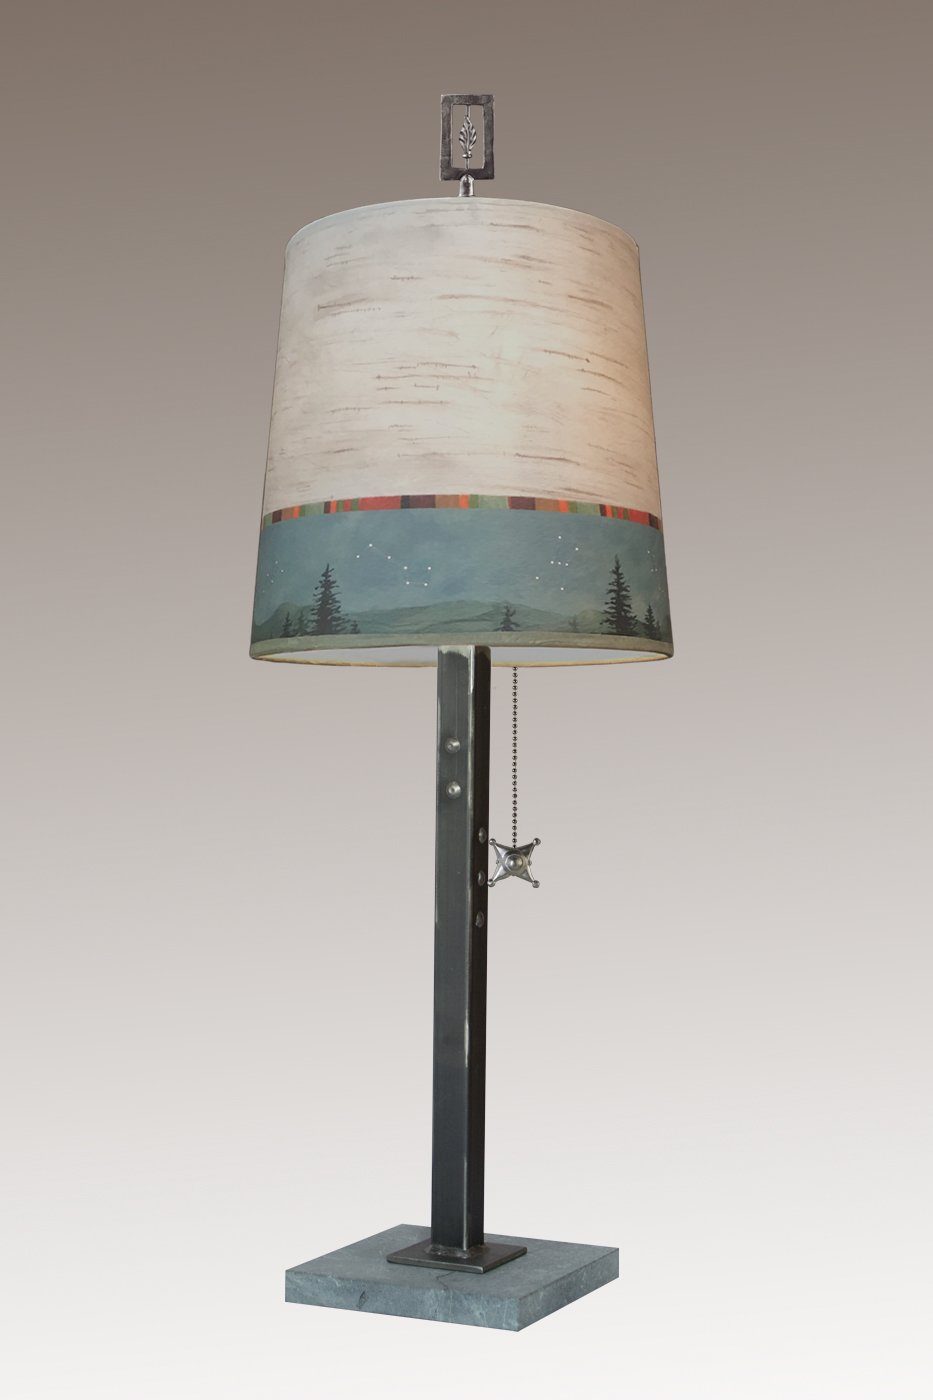 Janna Ugone &amp; Co Table Lamps Steel Table Lamp with Medium Drum Shade in Birch Midnight